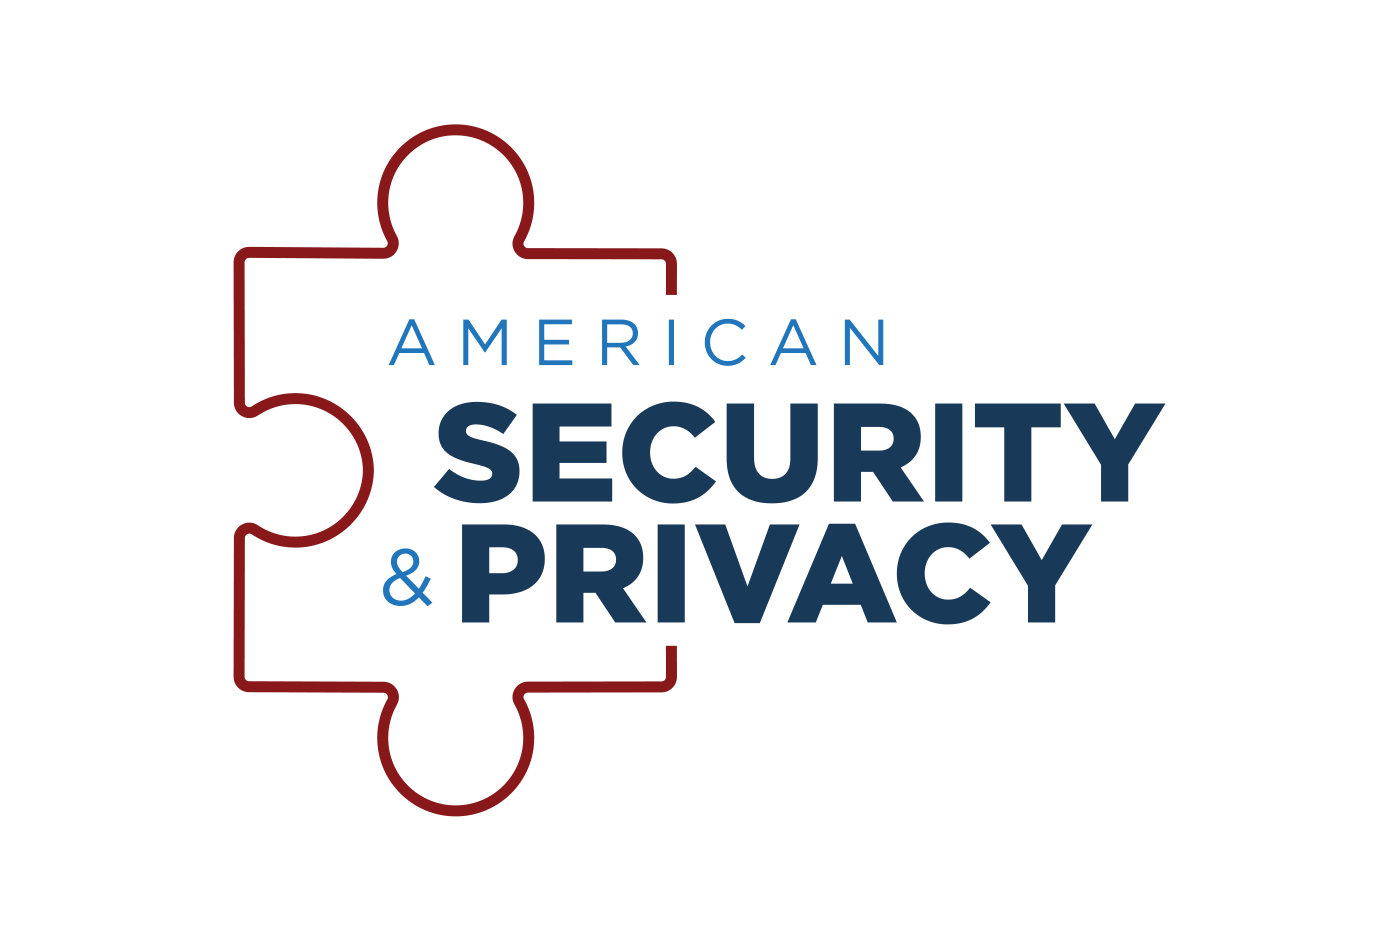 American Security & Privacy Logo